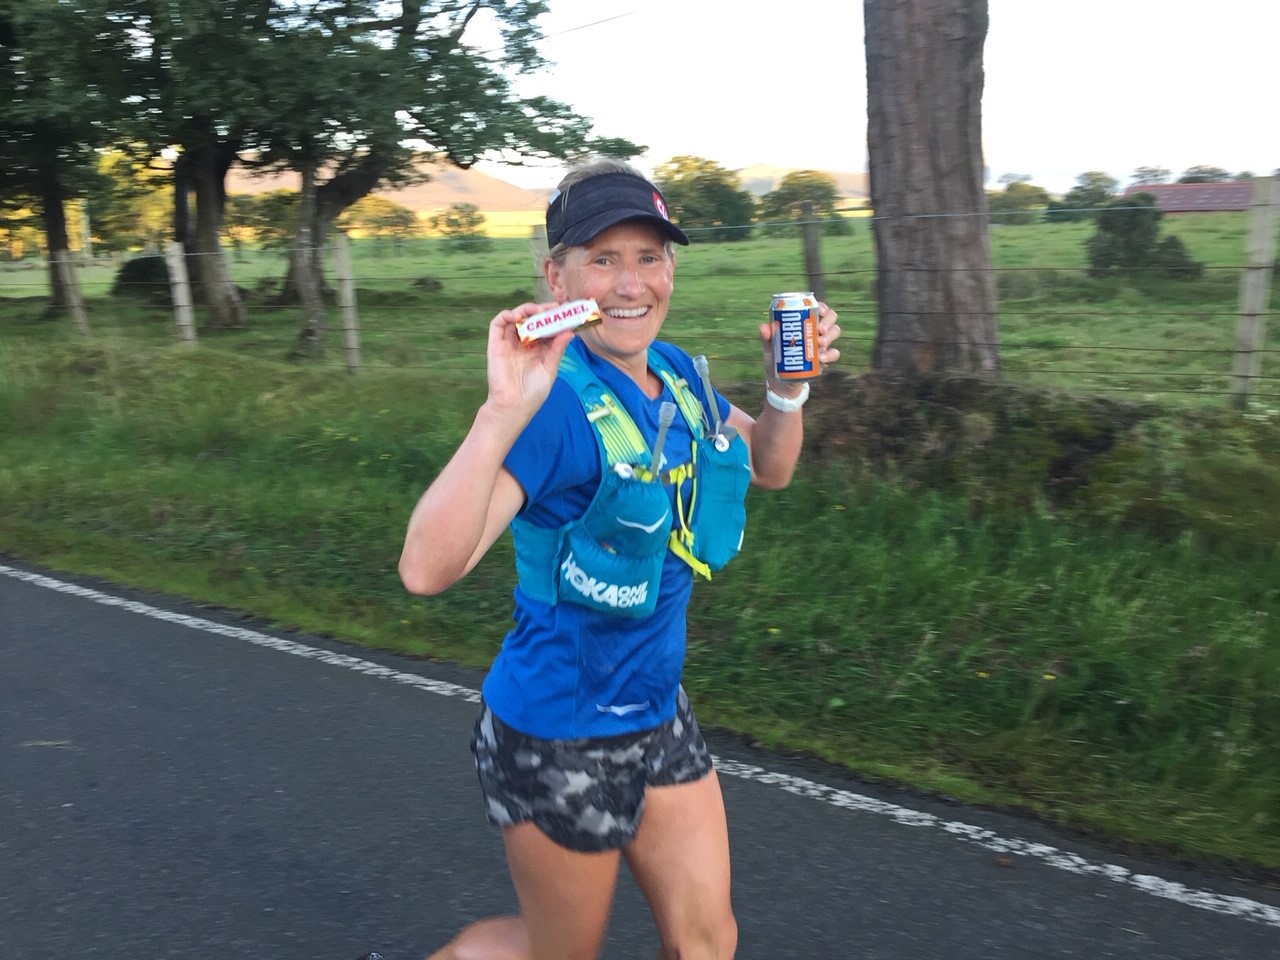 Runner Carla Molinaro ran from Land's End to John o' Groats in 12 days 30 minutes 14 seconds